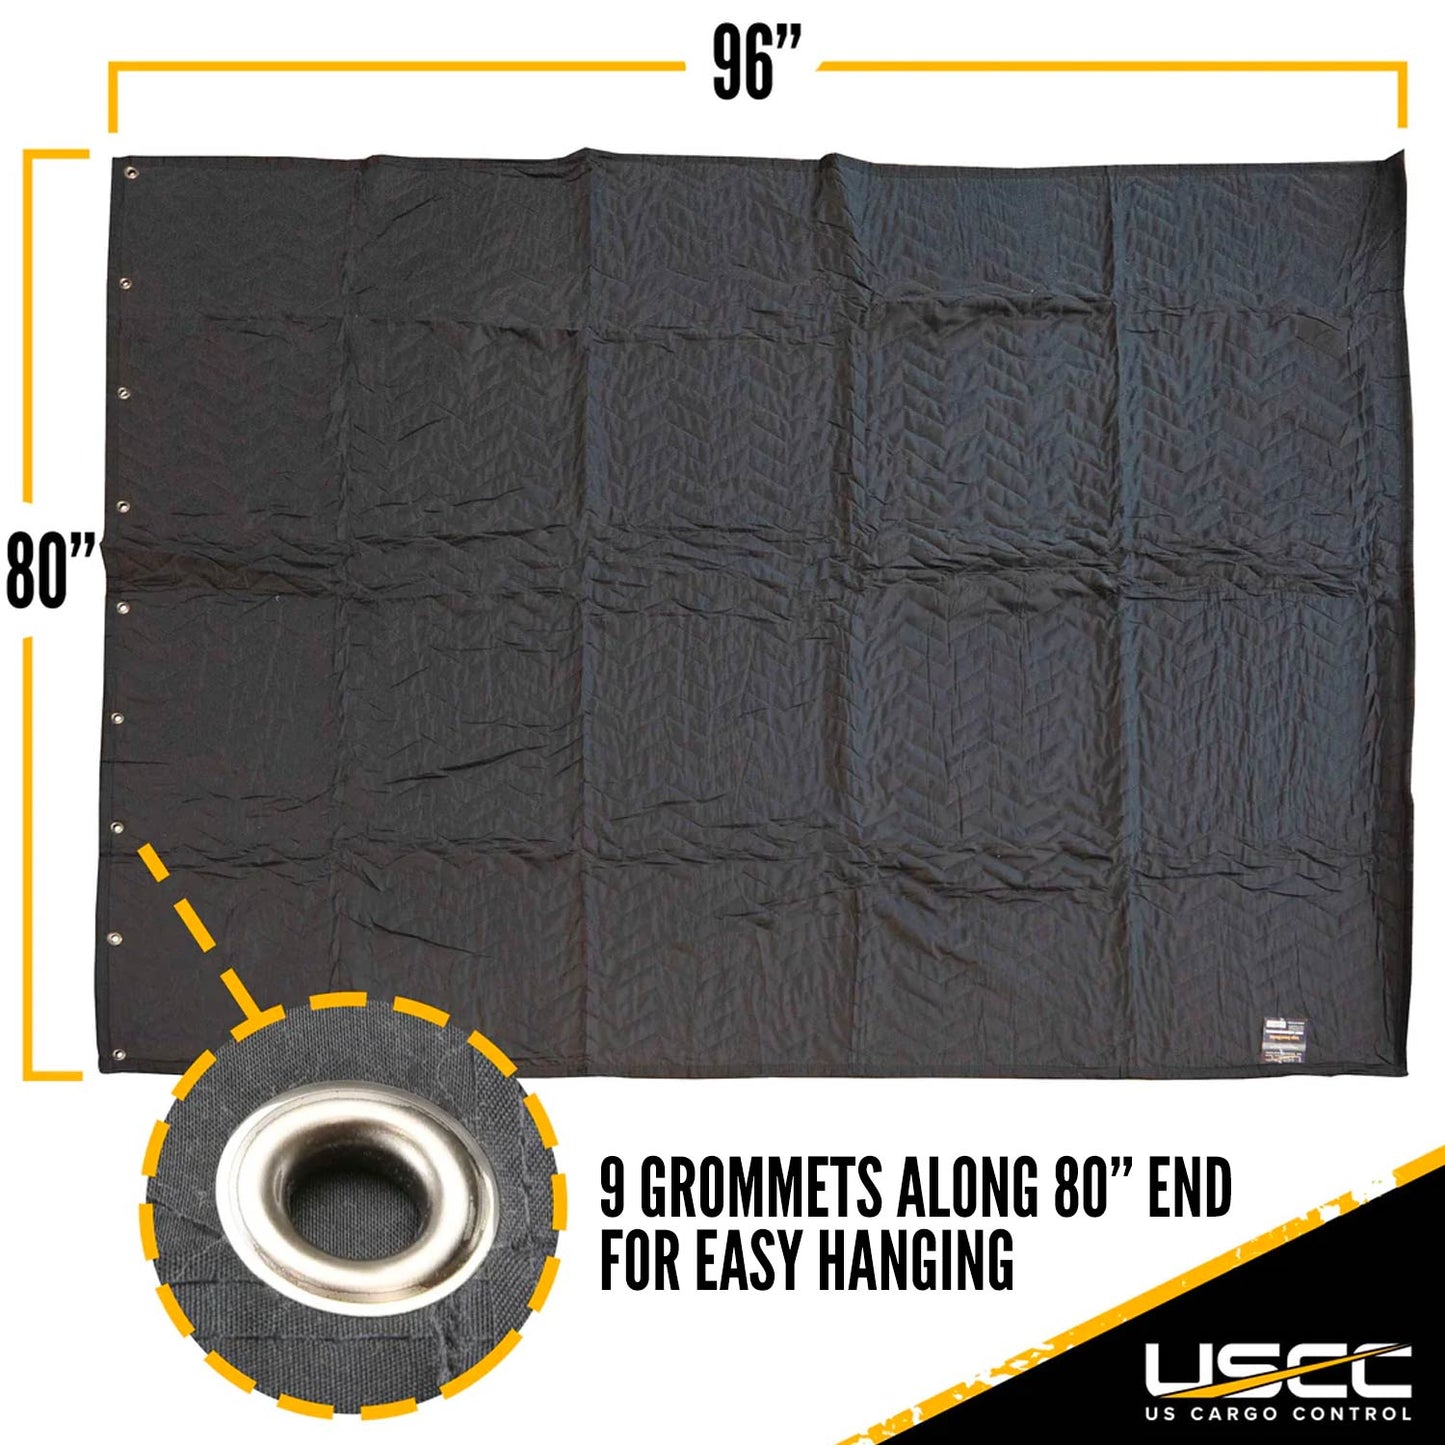 Large 80" x 96" Sound Blanket with Grommets | Moving Blanket